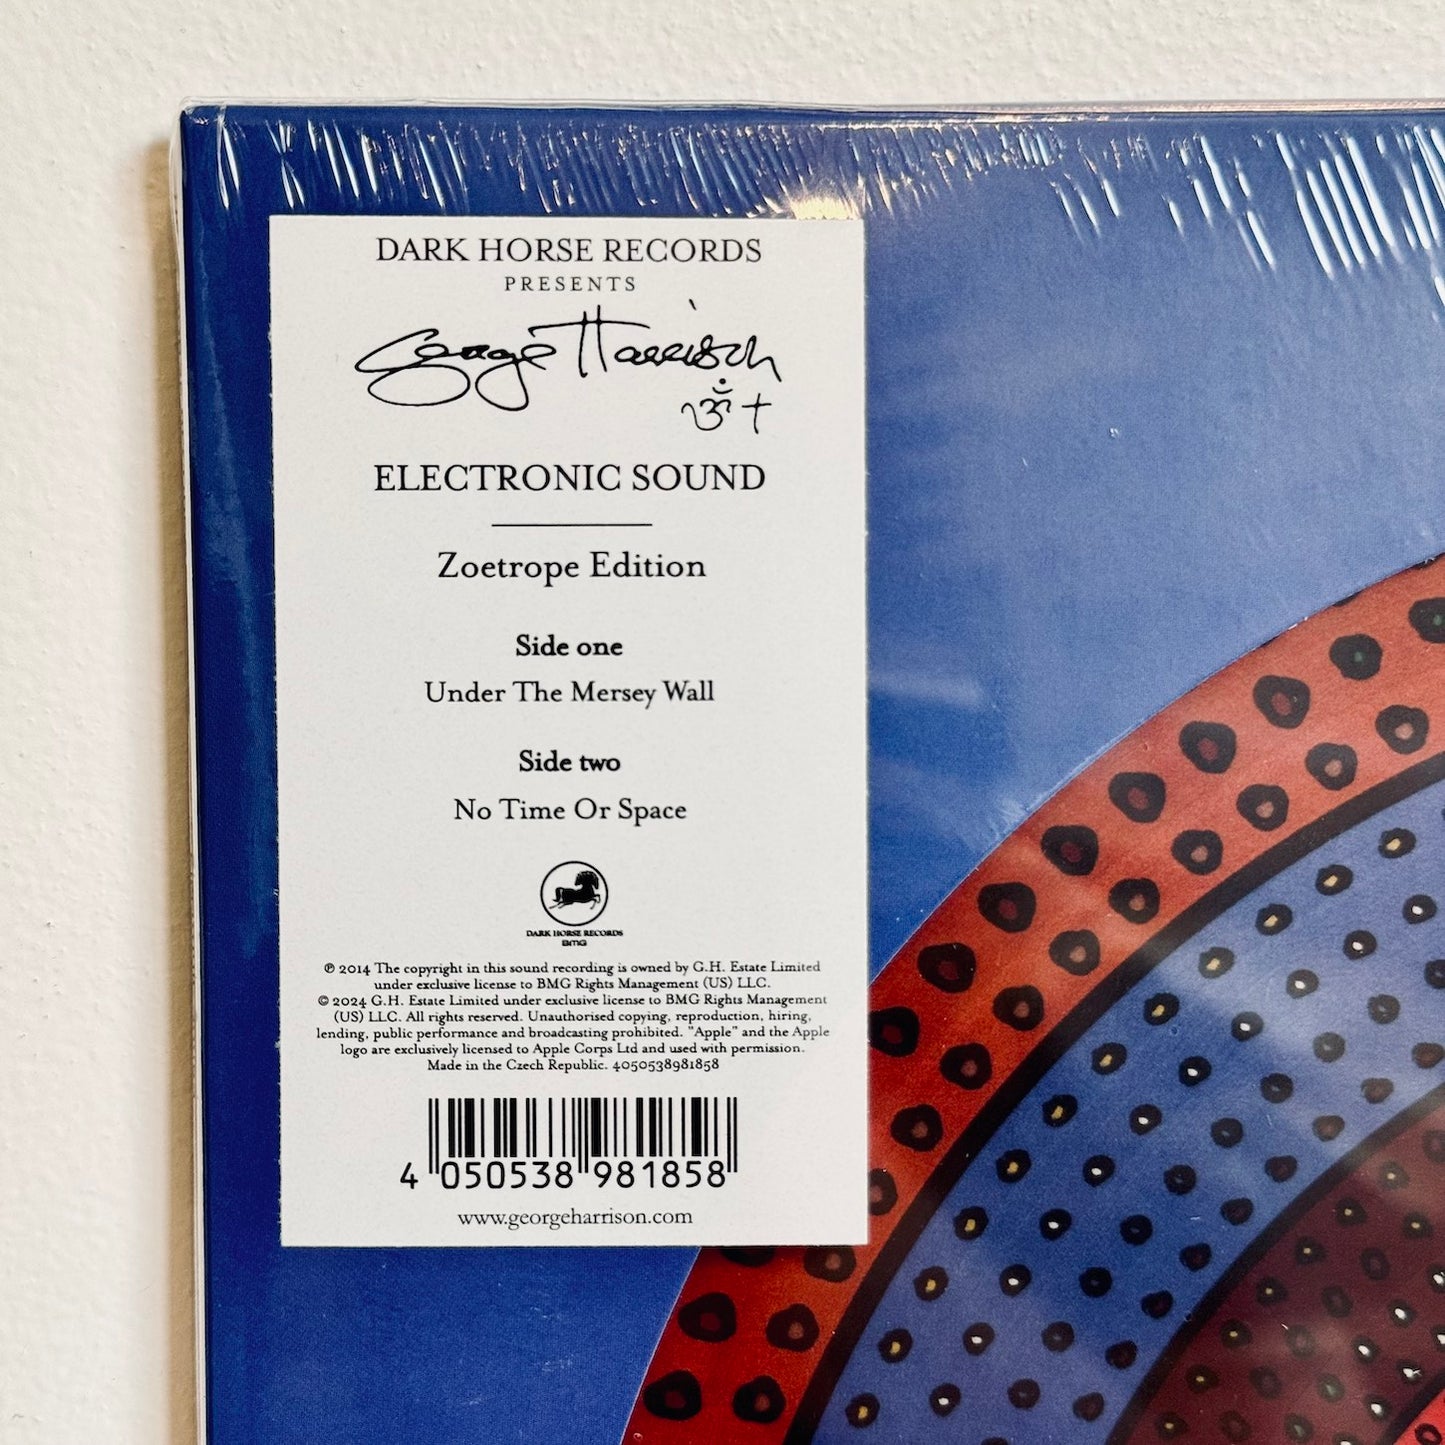 RSD2024 - GEORGE HARRISON - ELECTRONIC SOUND. LP [Ltd. Ed. Zoetrope Picture Disc / Edition of 3400]